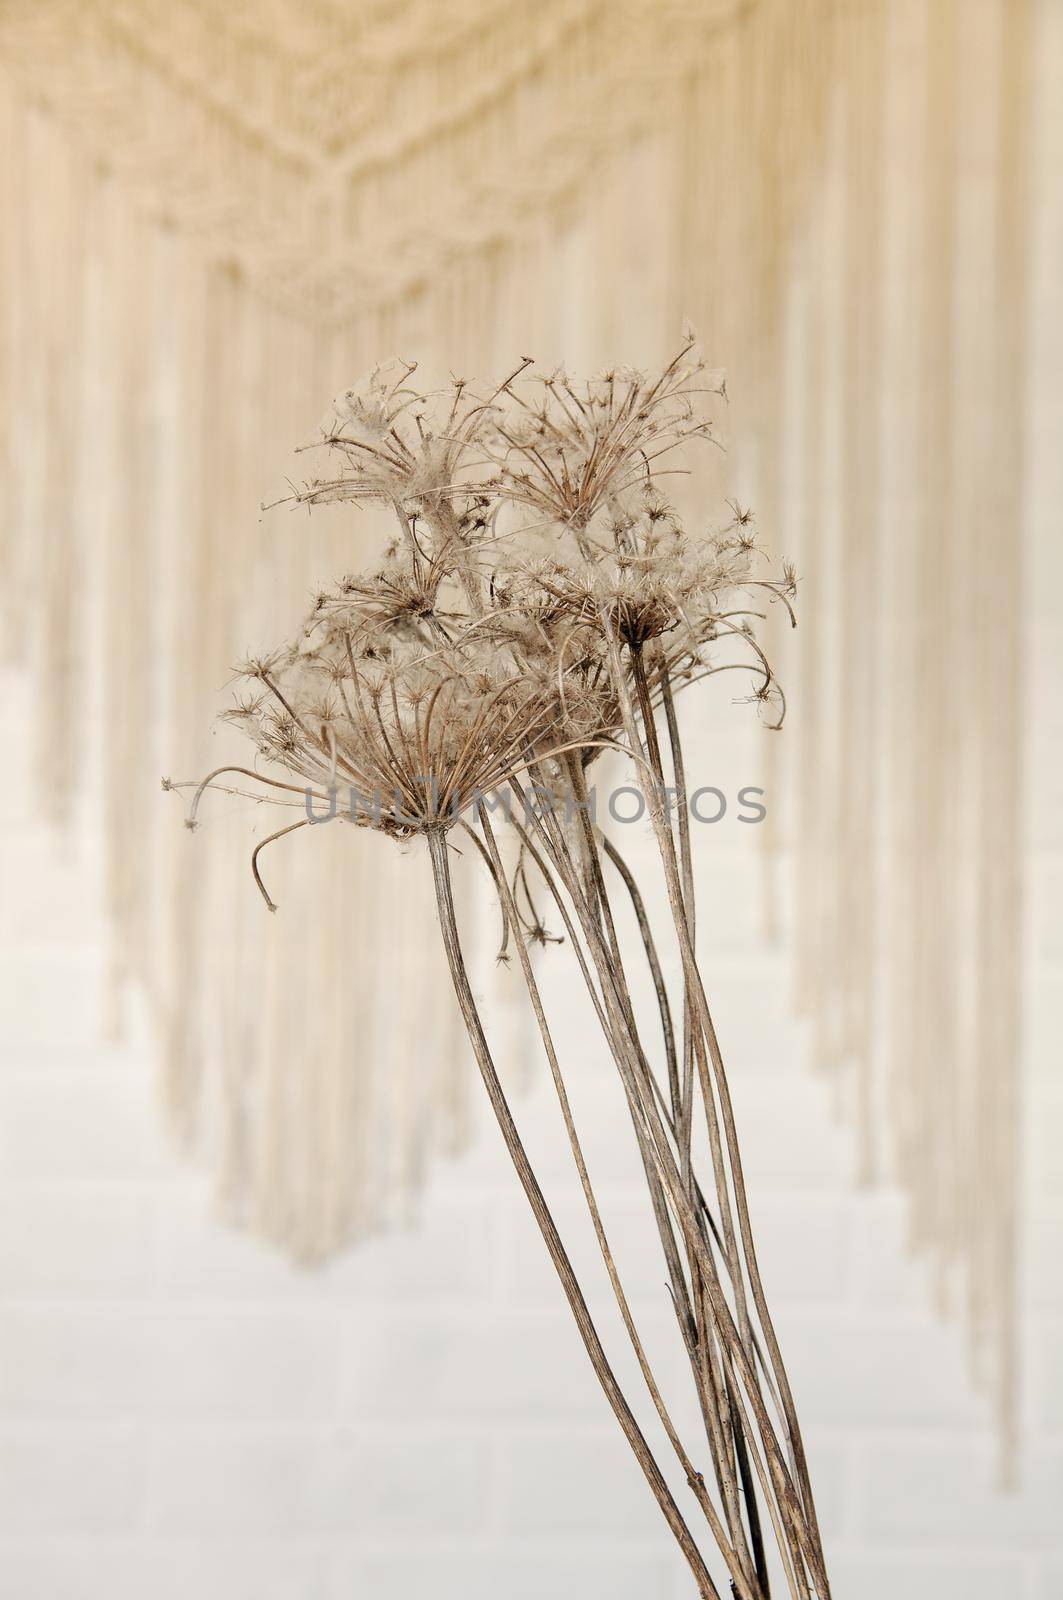 dry flowers braided with cobwebs on a brick wall background by ozornina